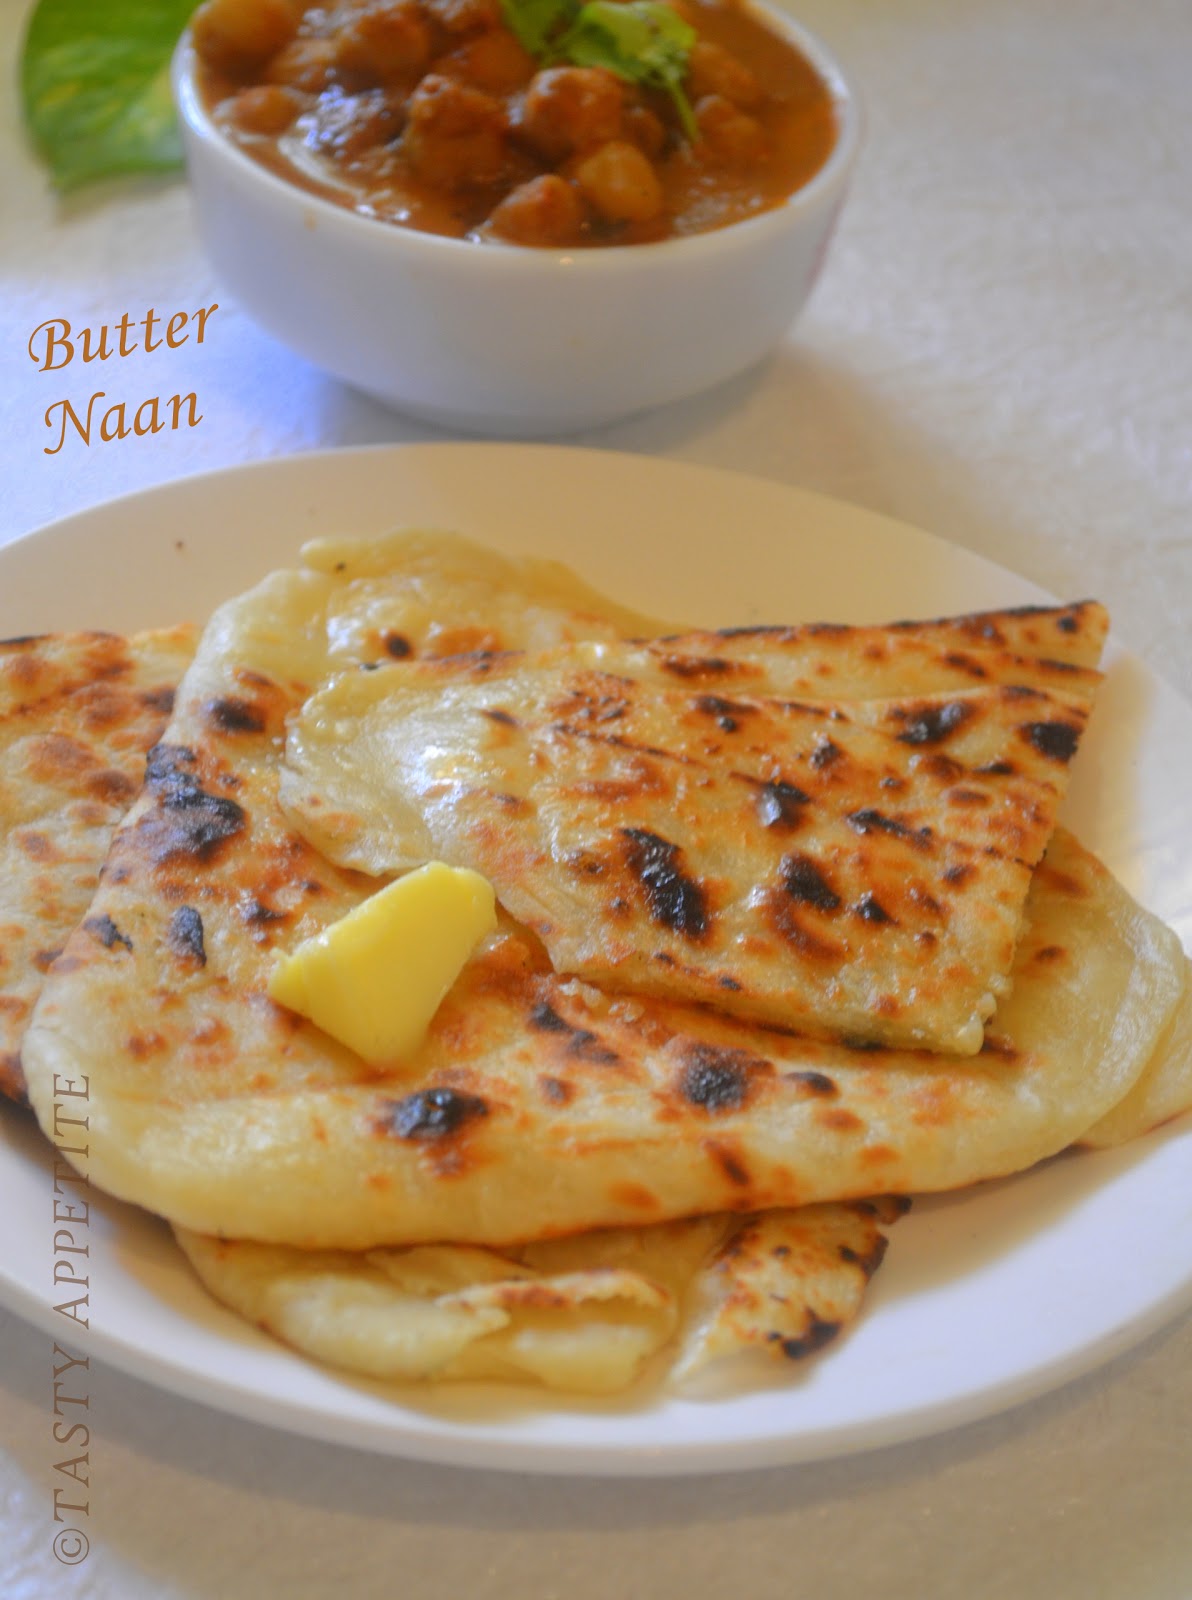 video Appetite Naan How / at naan to at make Naan to home Tasty butter make home:    how Butter